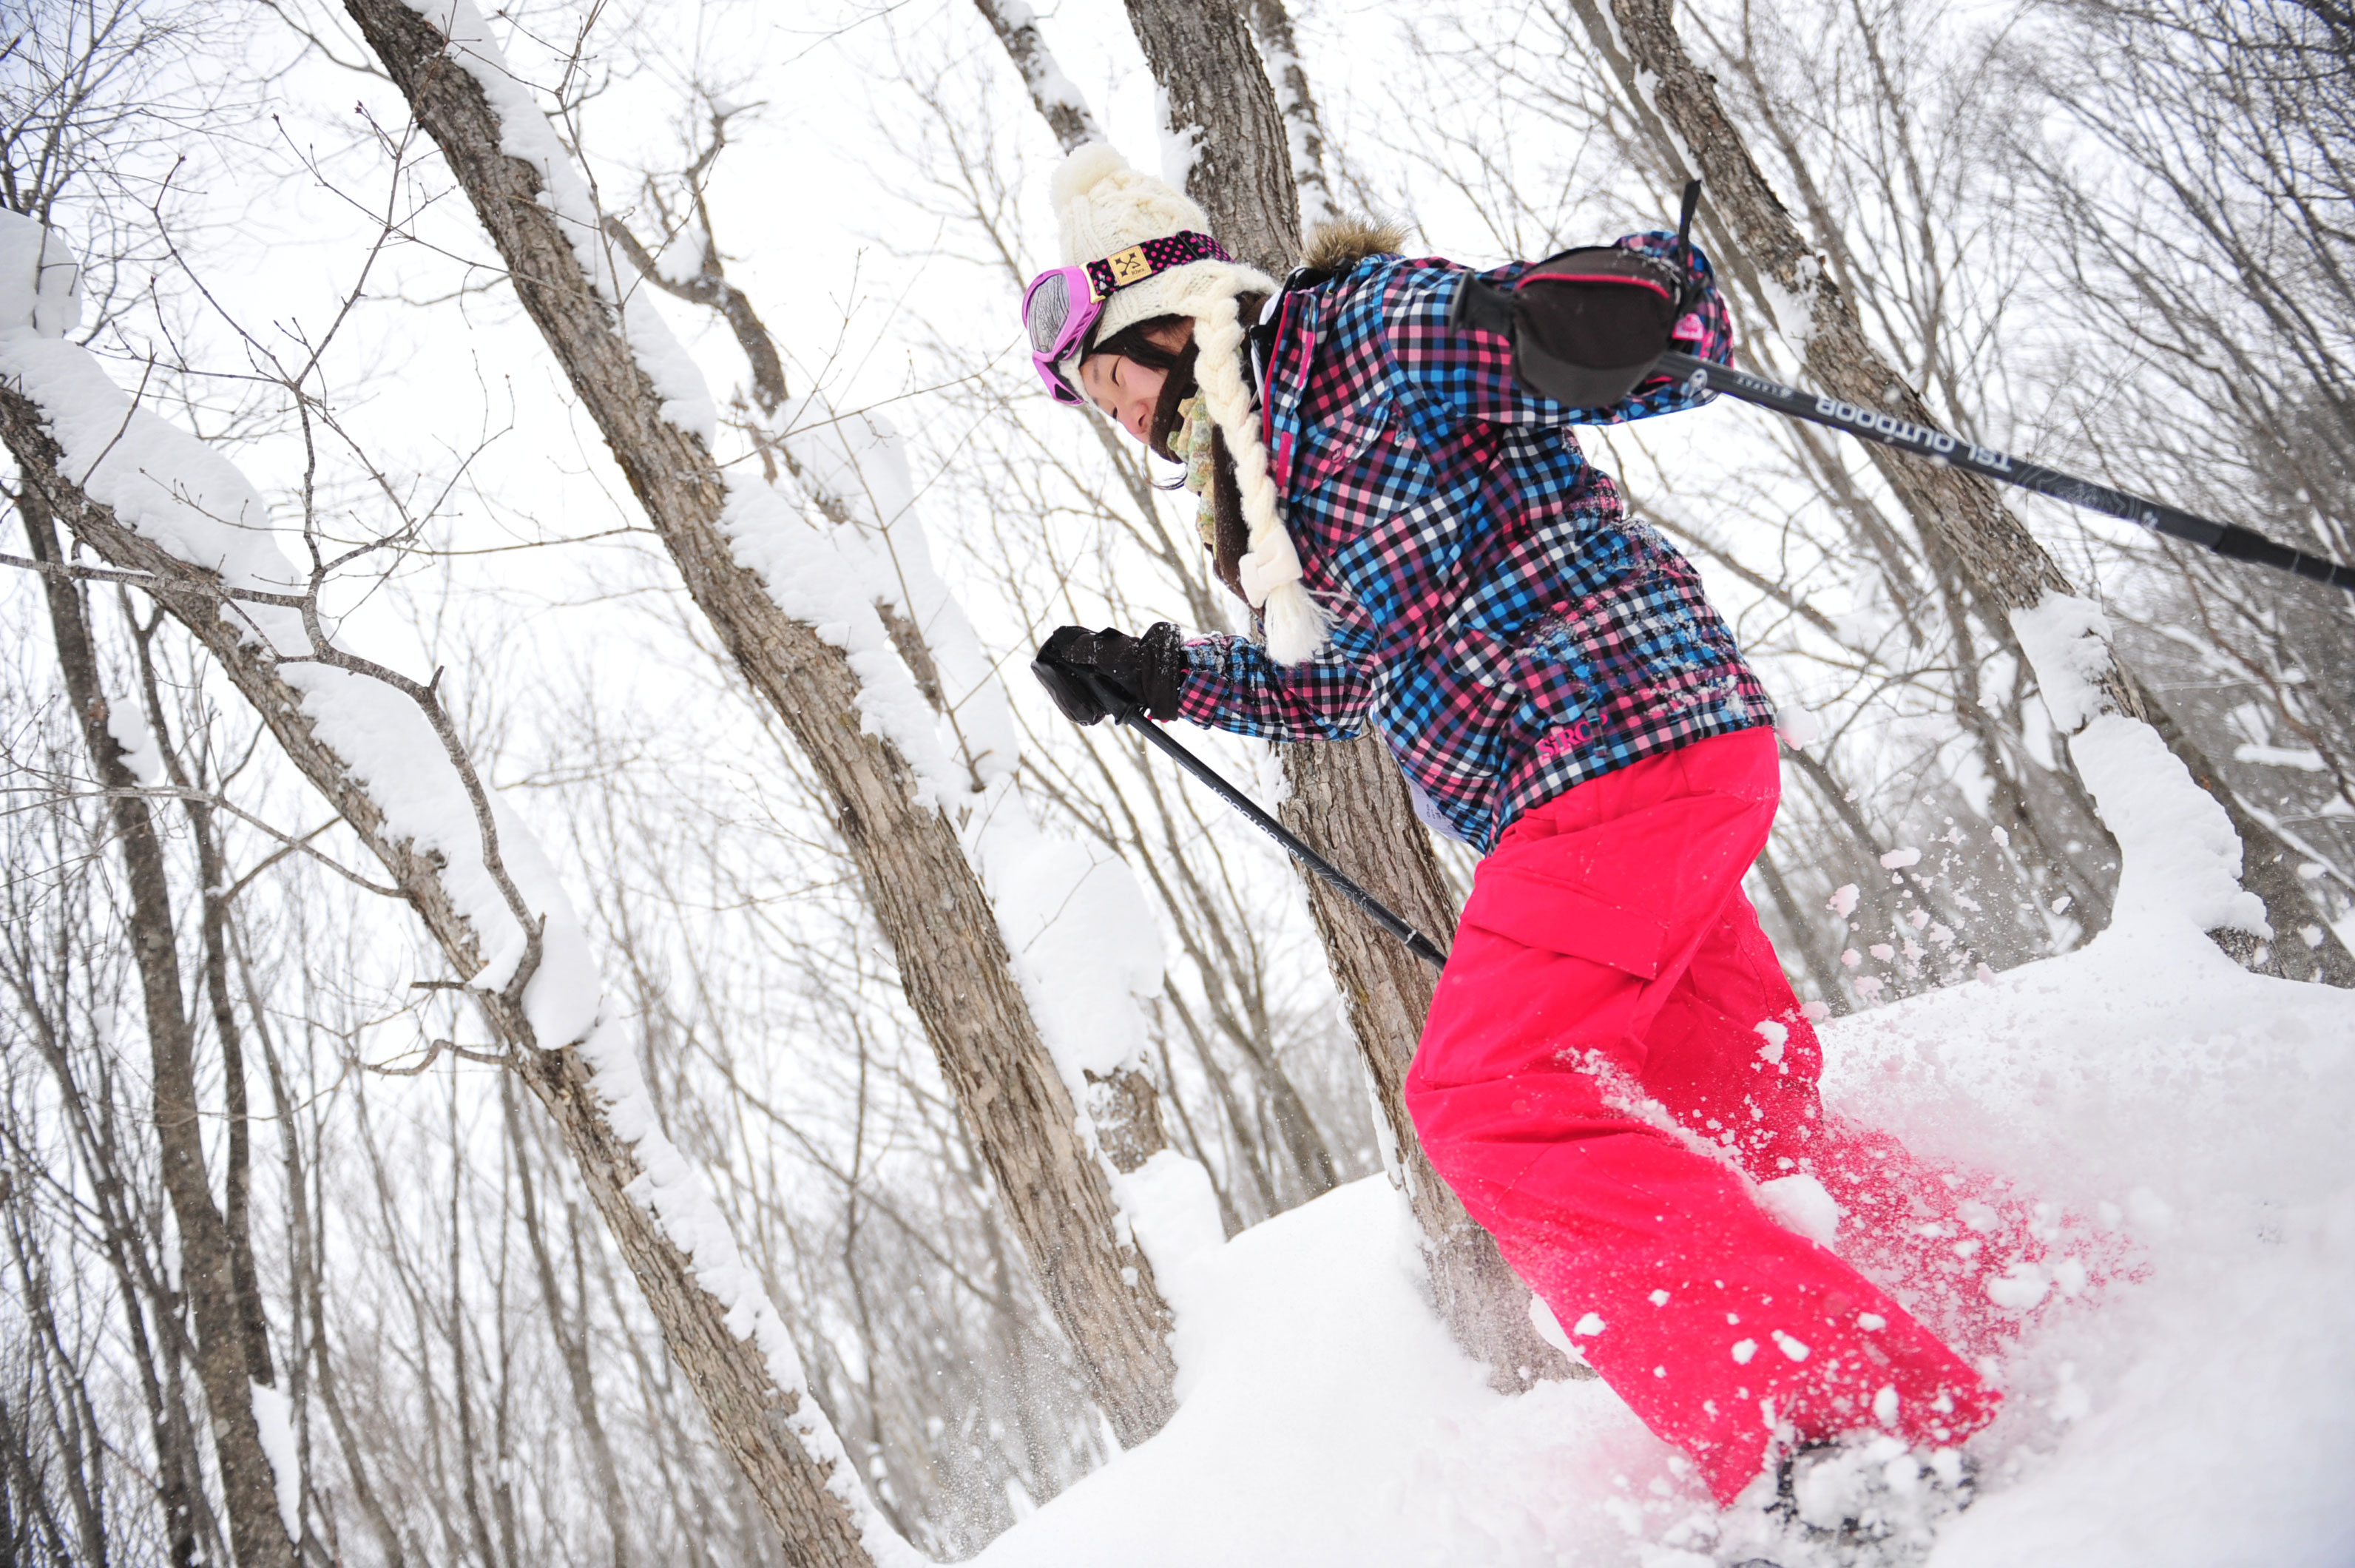 Not only spring skiing and snowboarding, but also snowshoes are recommended.